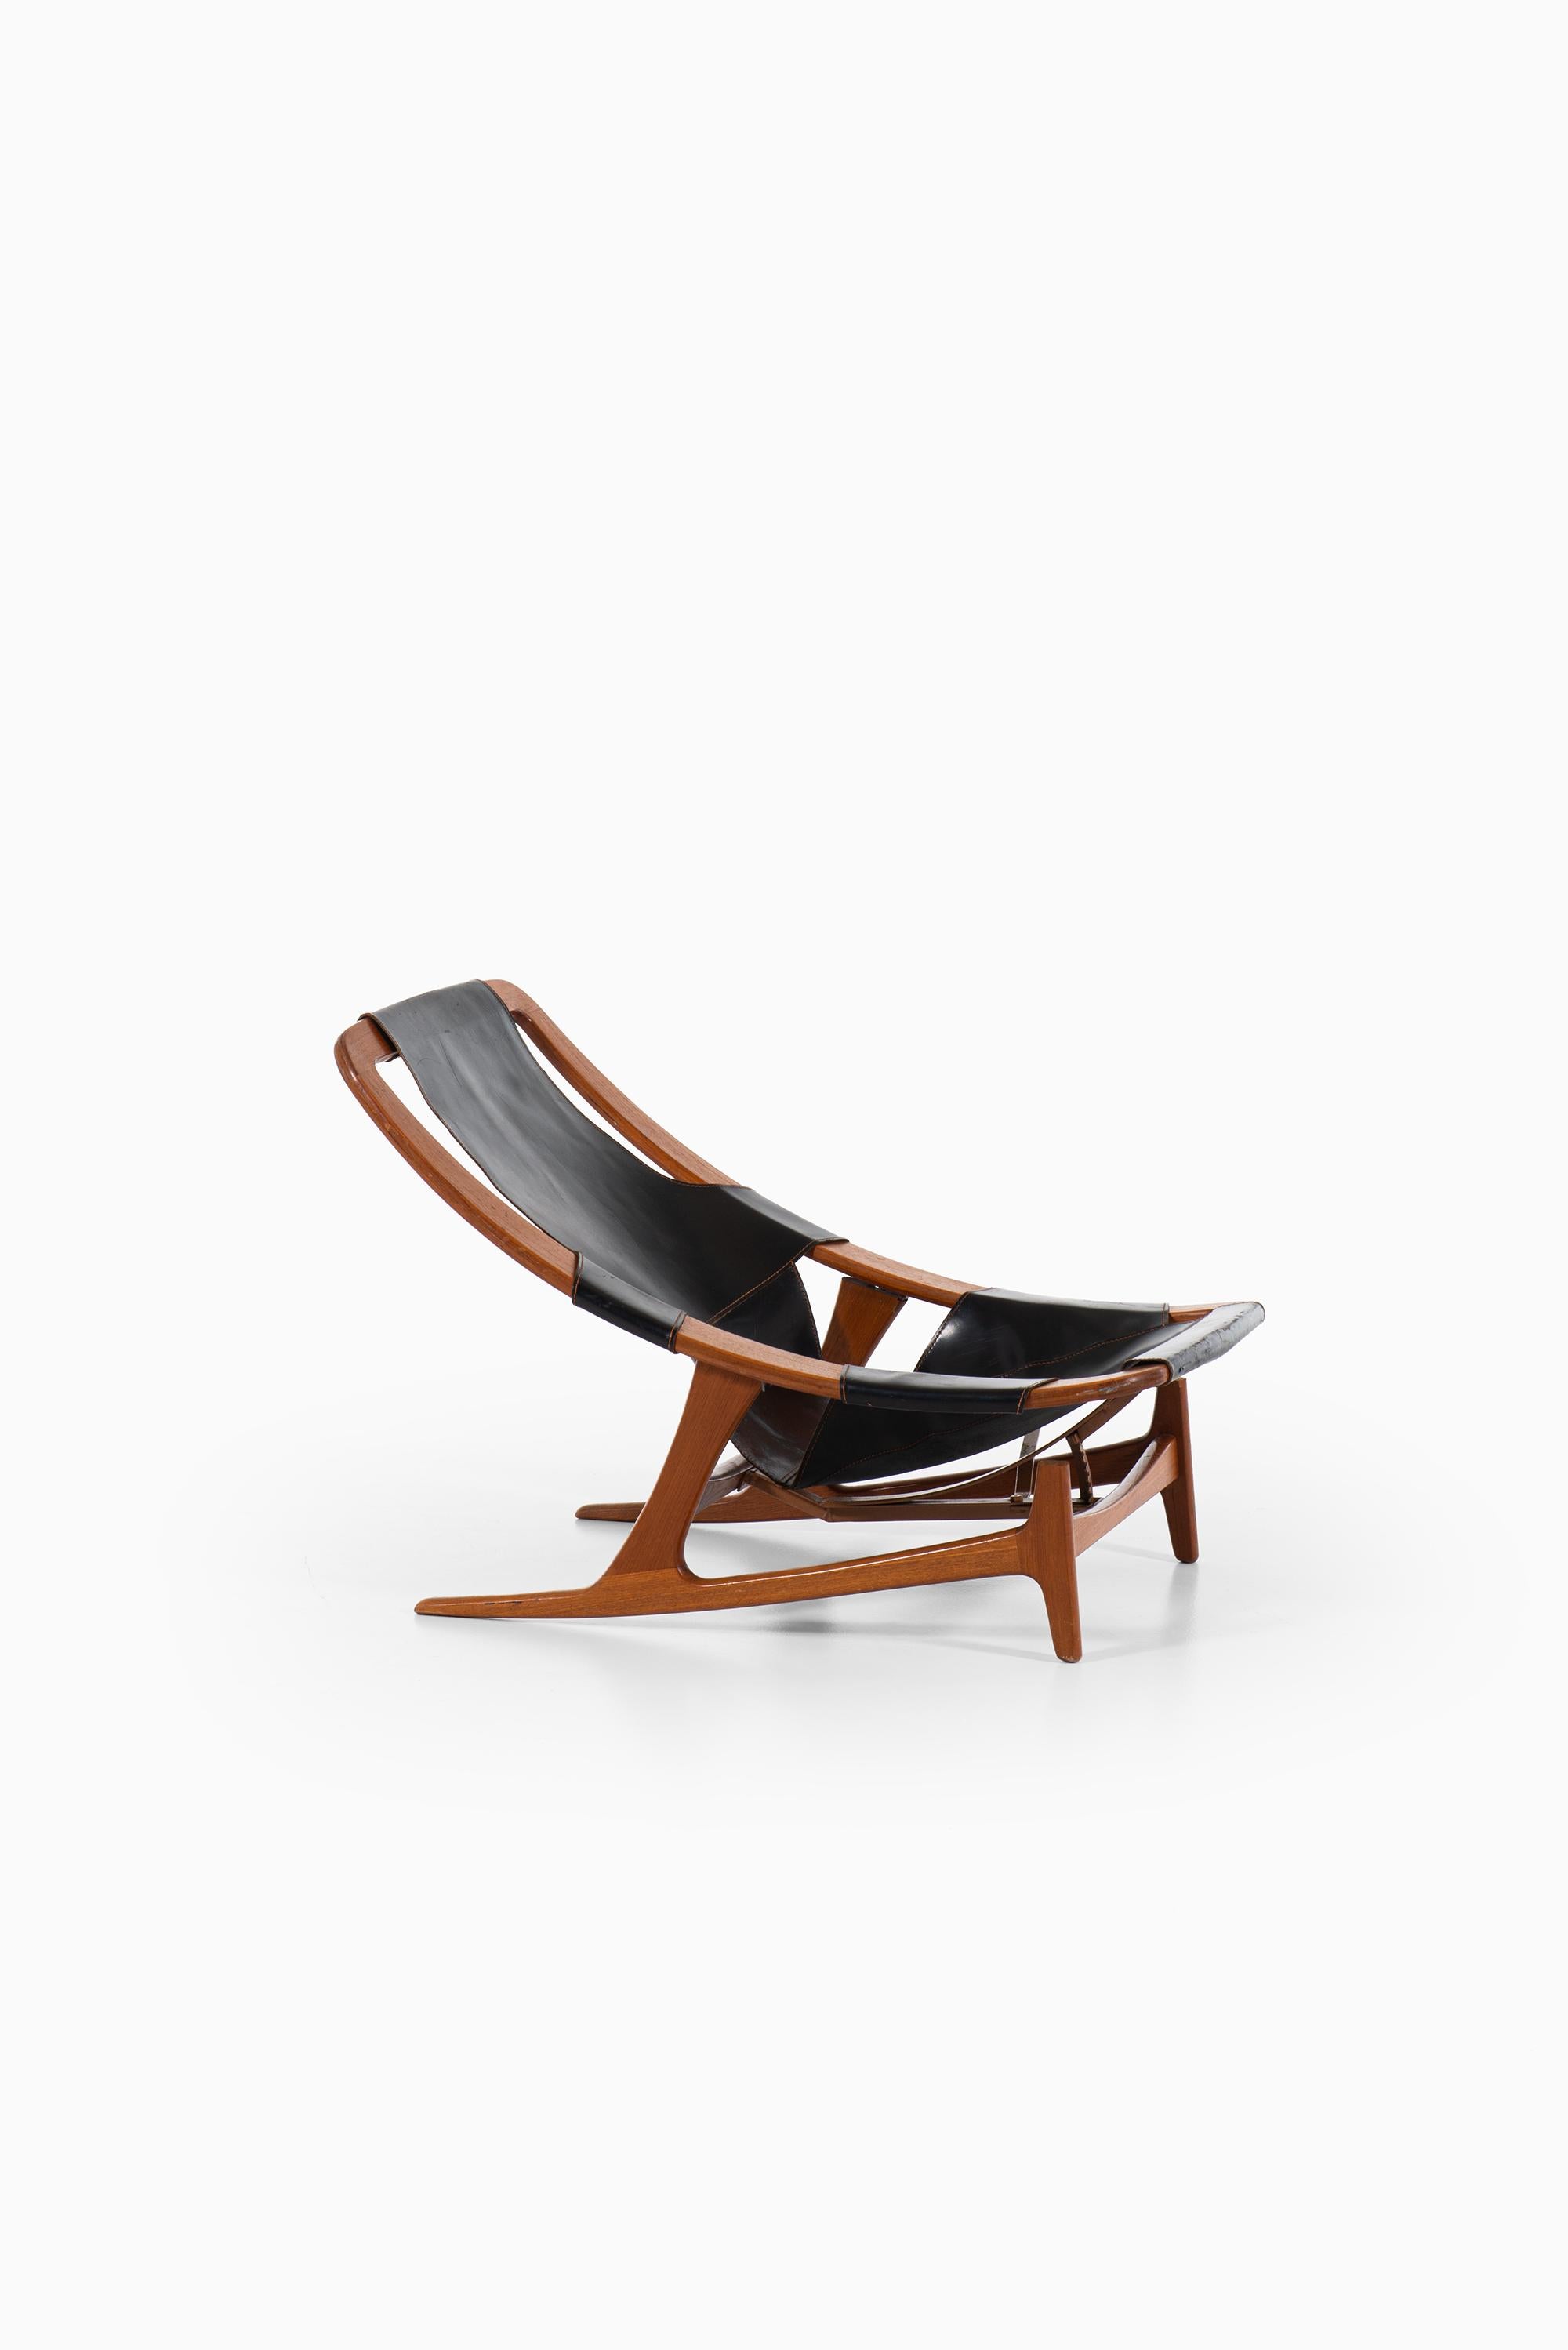 Rare lounge chair model Holmenkollen designed by Arne Tidemand-Ruud. Produced by Norcraft in Norway.